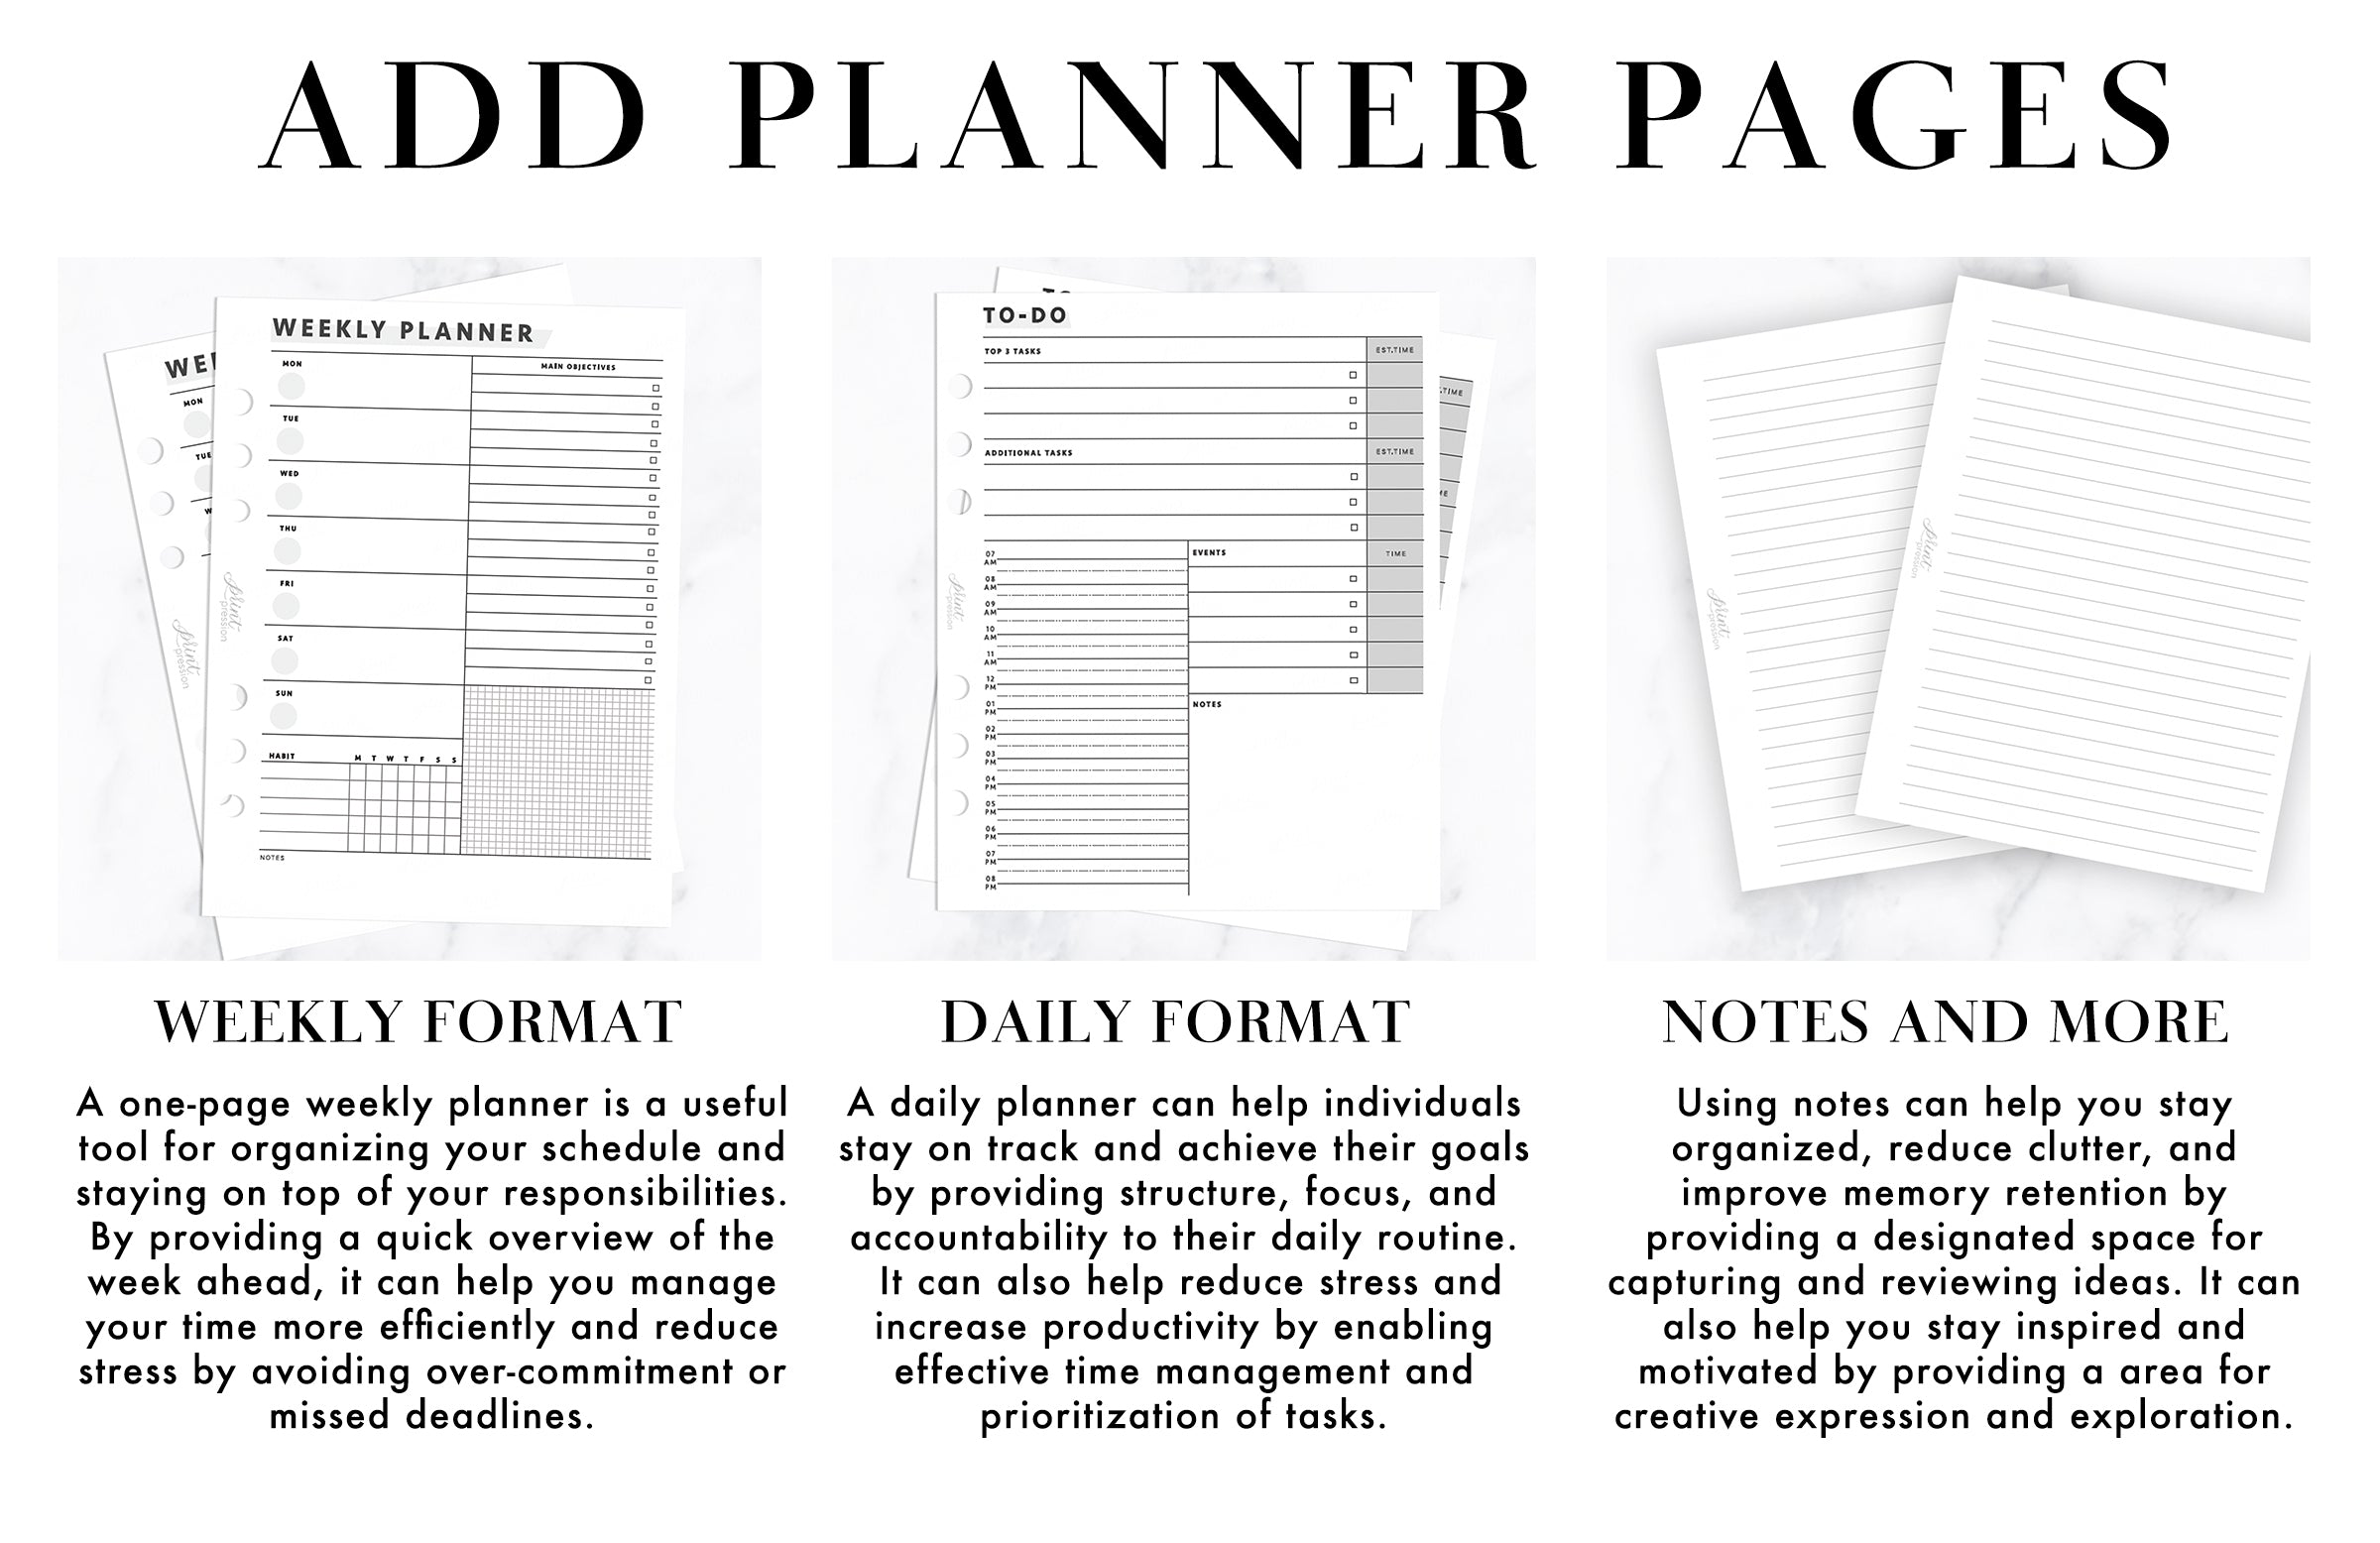 ADD PLANNER PAGES, A one-page weekly planner is a useful tool for organizing your schedule and staying on top of your responsibilities. By providing a quick overview of the week ahead, it can help you manage your time more efficiently and reduce stress by avoiding over-commitment or missed deadlines.